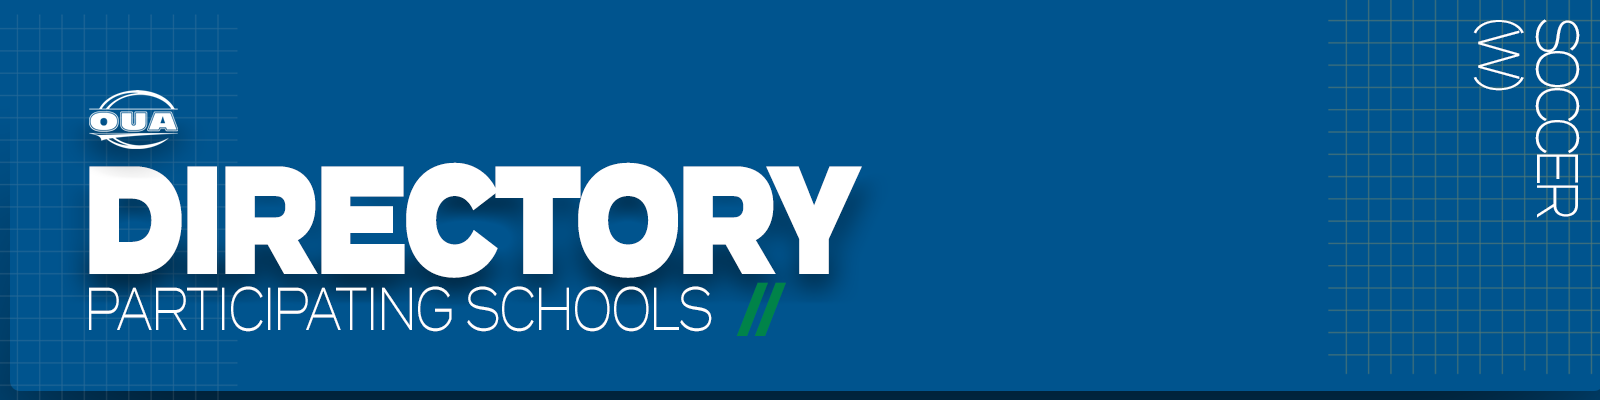 Predominantly blue graphic with large white text on the left side that reads 'Directory, Participating Schools' and small white vertical text on the right side that reads 'Soccer W'